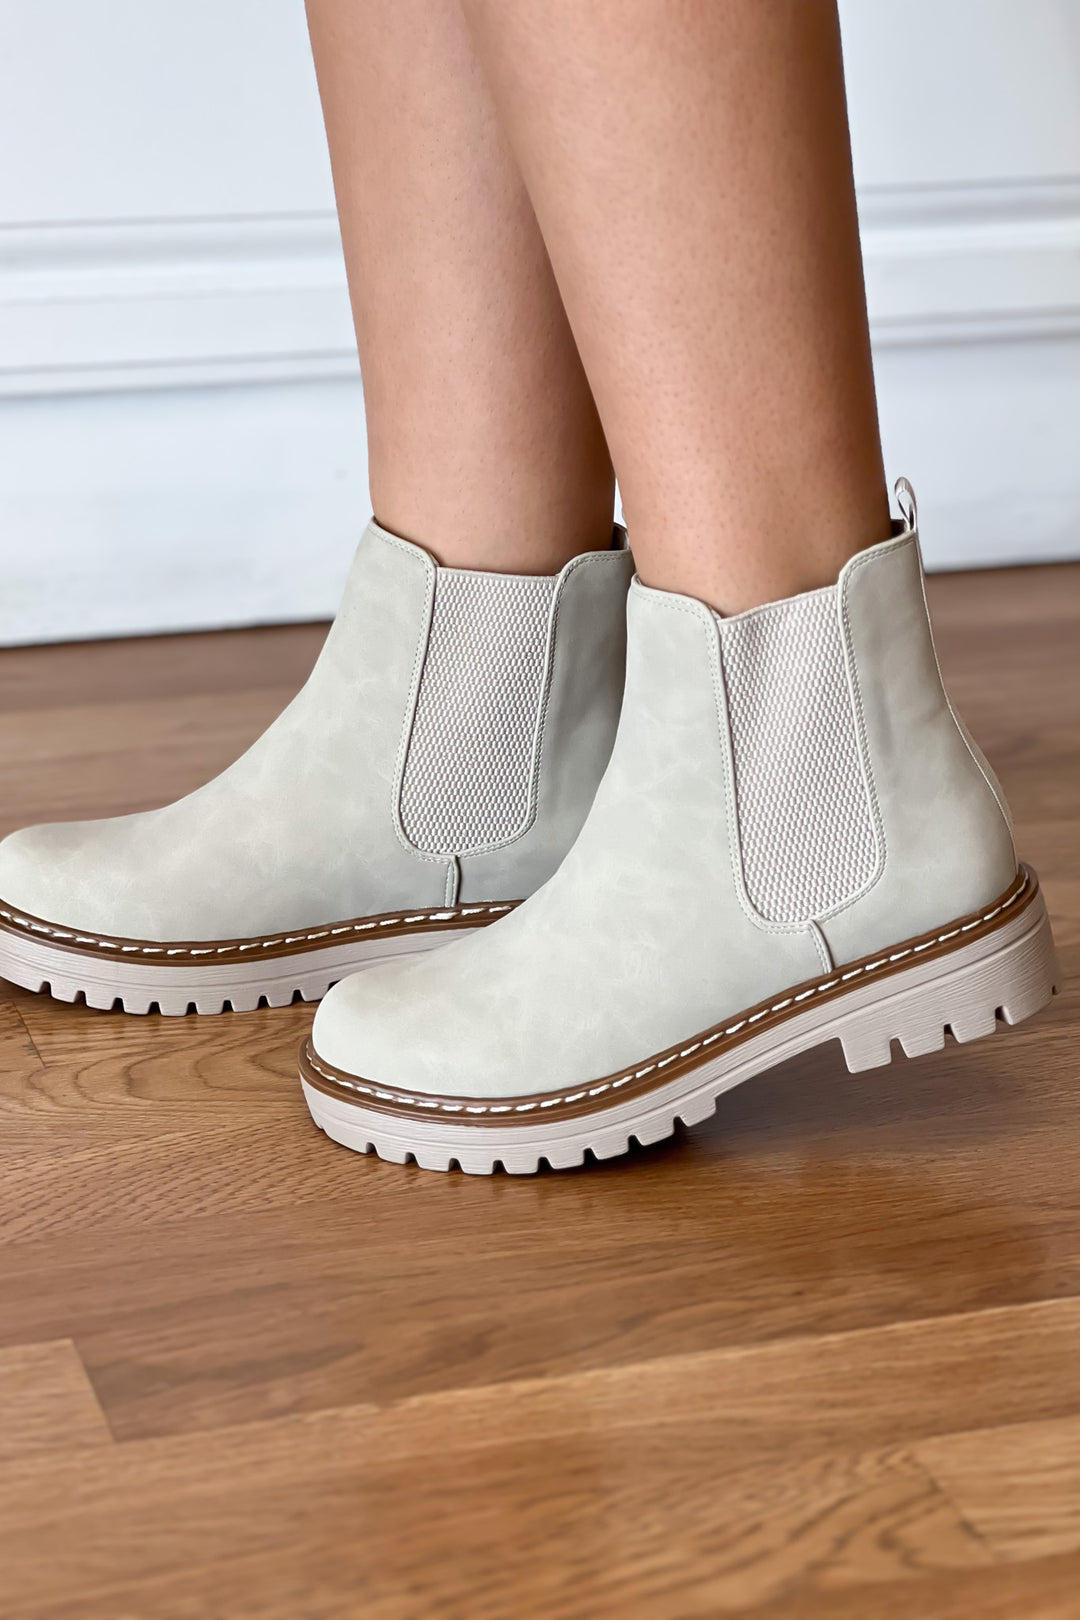 Paden Boots in Natural - ShopSpoiled